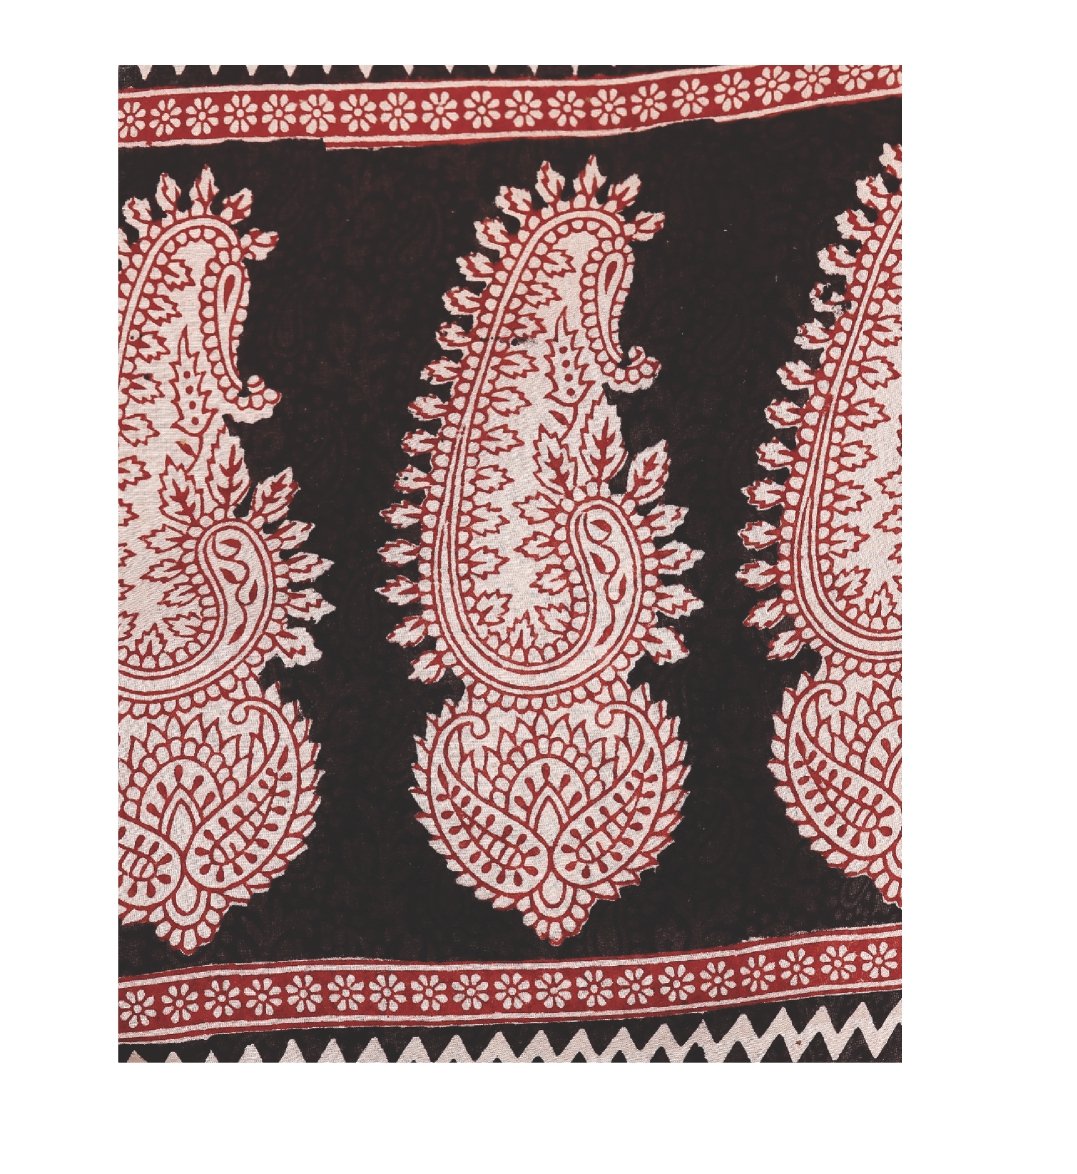 Kalakari India Black Bagh Handblock Print Handcrafted Cotton Saree-Saree-Kalakari India-ZIBASA0019-Bagh, Cotton, Geographical Indication, Hand Blocks, Hand Crafted, Heritage Prints, Natural Dyes, Sarees, Sustainable Fabrics-[Linen,Ethnic,wear,Fashionista,Handloom,Handicraft,Indigo,blockprint,block,print,Cotton,Chanderi,Blue, latest,classy,party,bollywood,trendy,summer,style,traditional,formal,elegant,unique,style,hand,block,print, dabu,booti,gift,present,glamorous,affordable,collectible,Sari,Sar